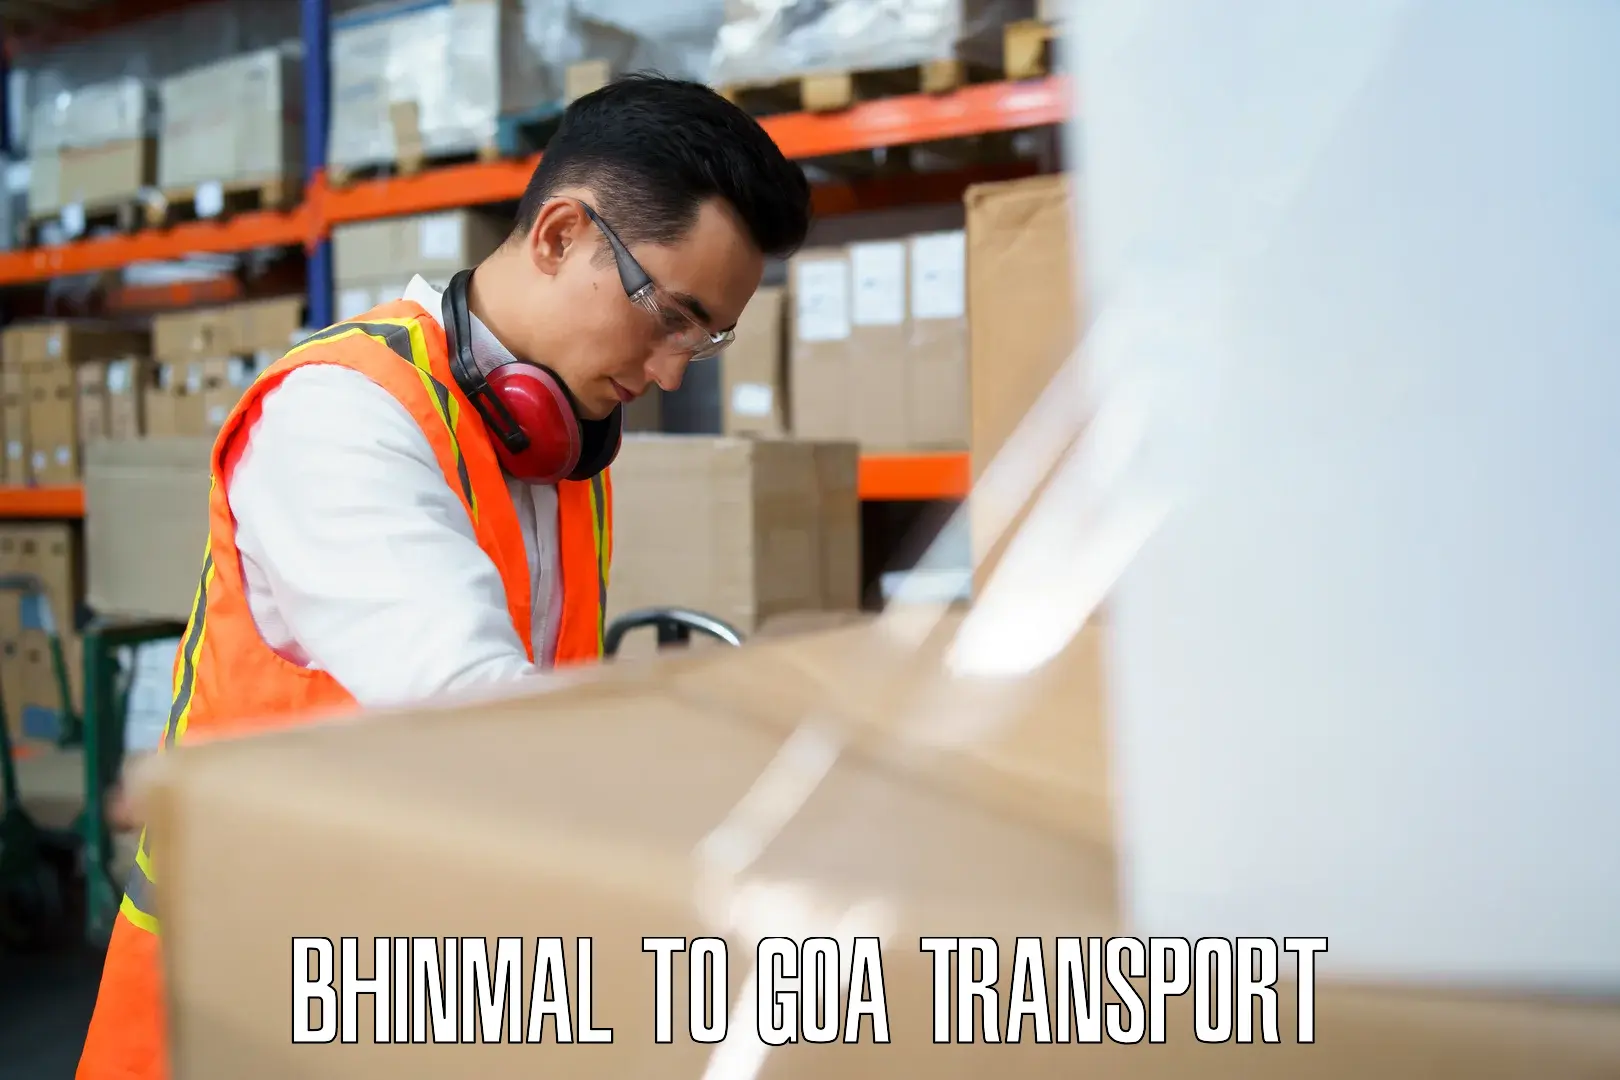 Road transport online services in Bhinmal to Bardez